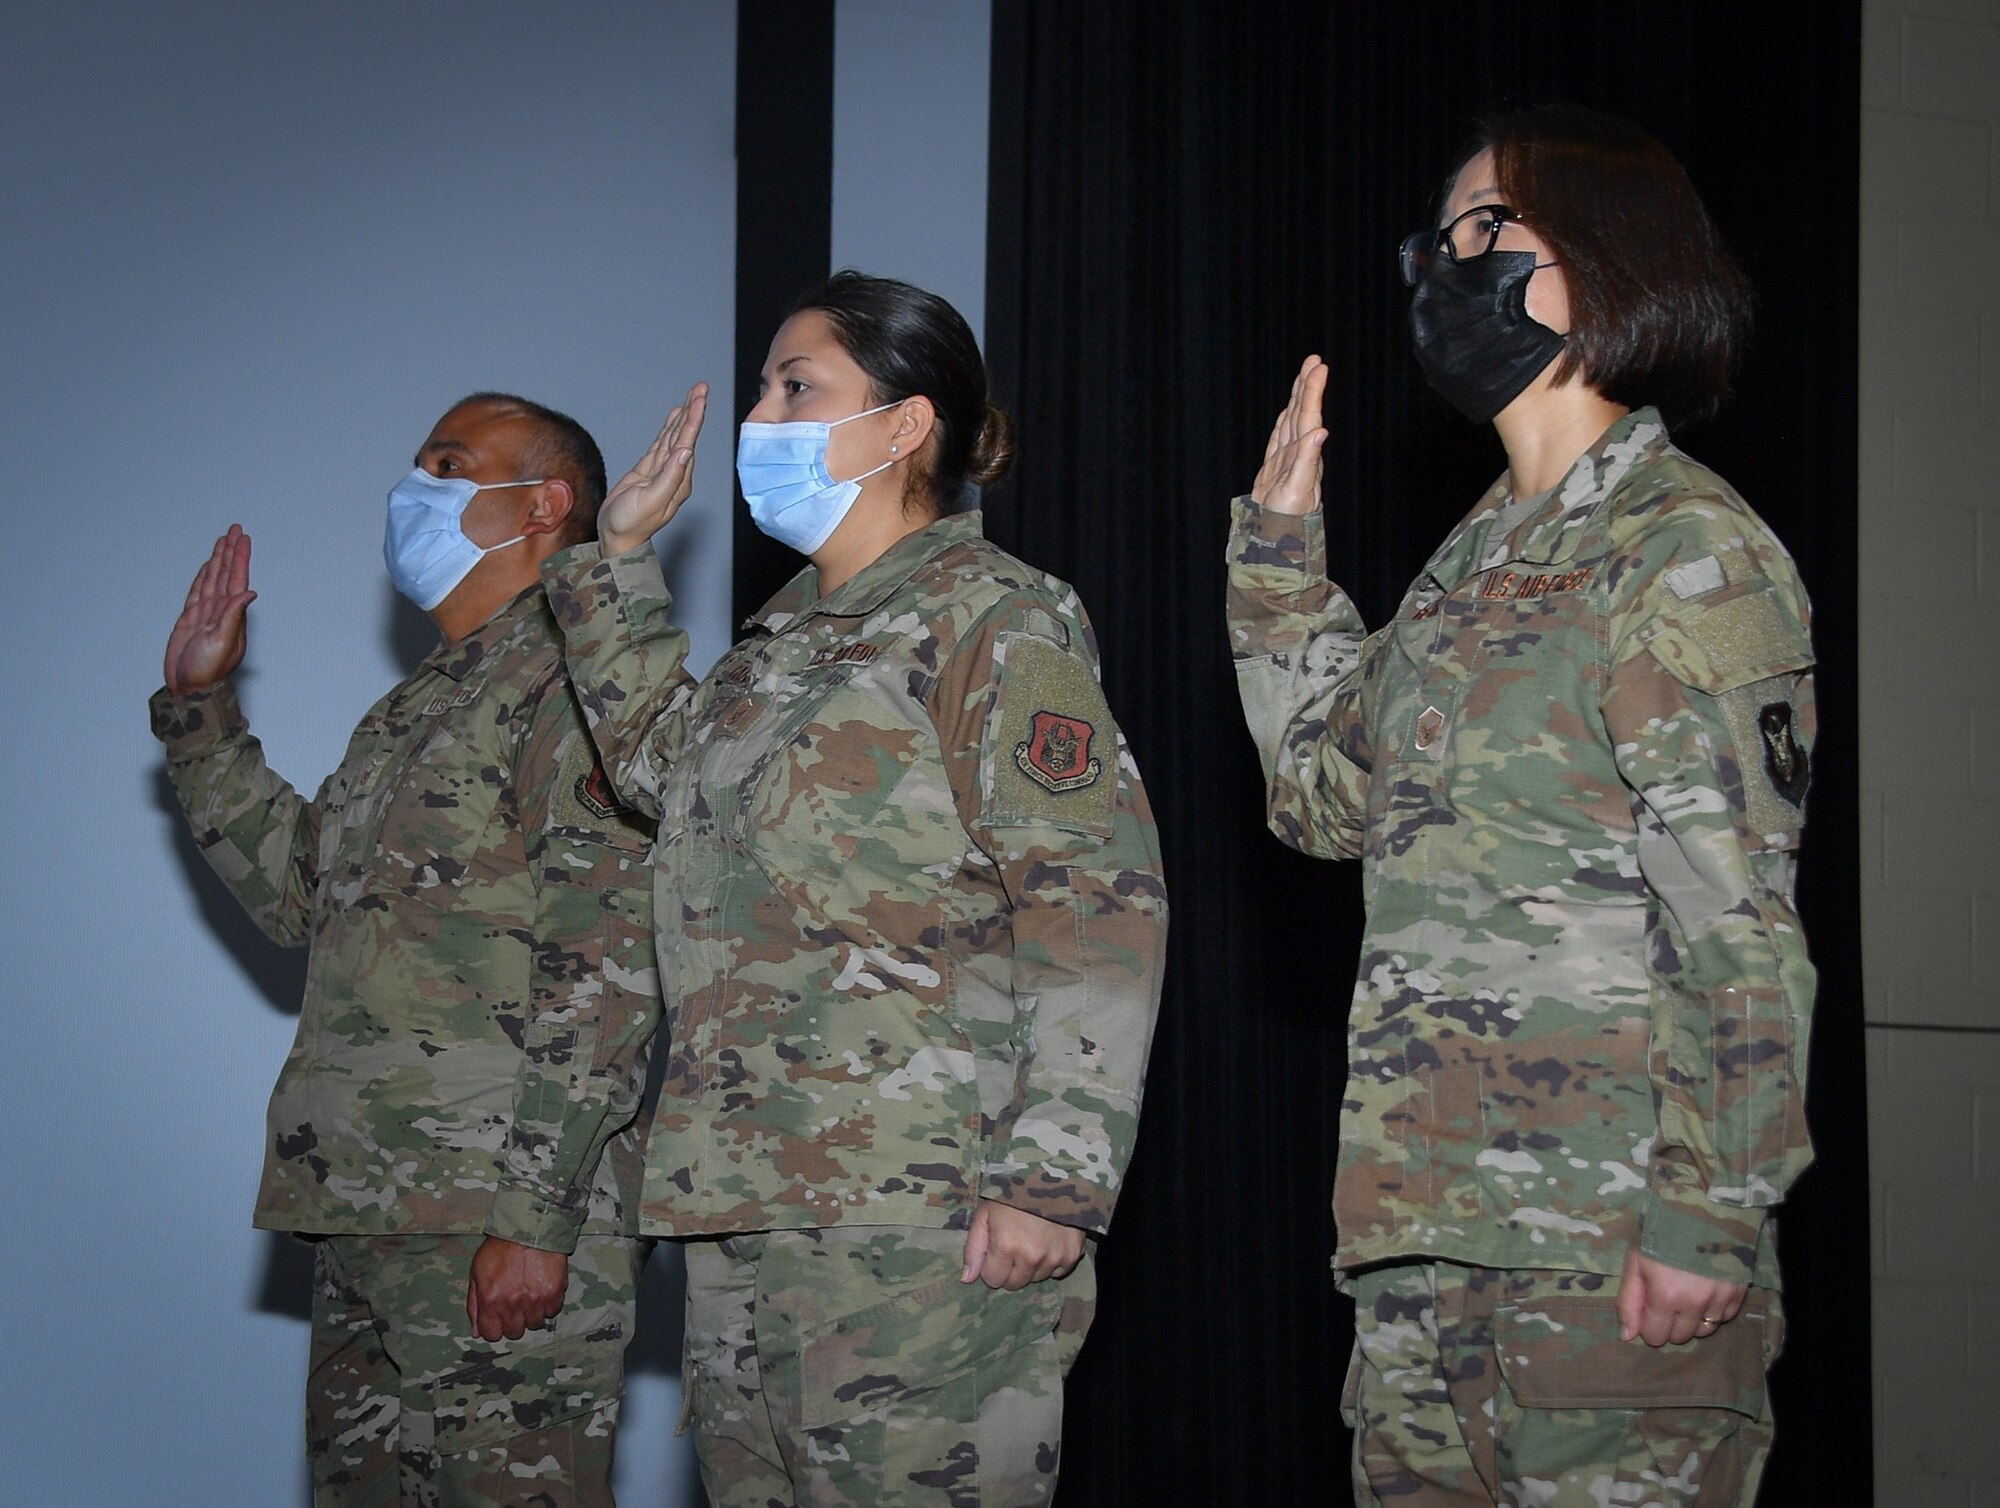 The 301st Fighter Wing Medical Squadron's Non-Commissioned Officers accept the charge and role as they transition to Senior Non-Commissioned Officers during an MDS enlisted promotion ceremony at NAS JRB Fort Worth on August 8, 2021. The ceremony took place in front of the entire MDS and 301 FW command leadership as witnesses. (U.S. Air Force photo by Master Sgt. Jeremy Roman)